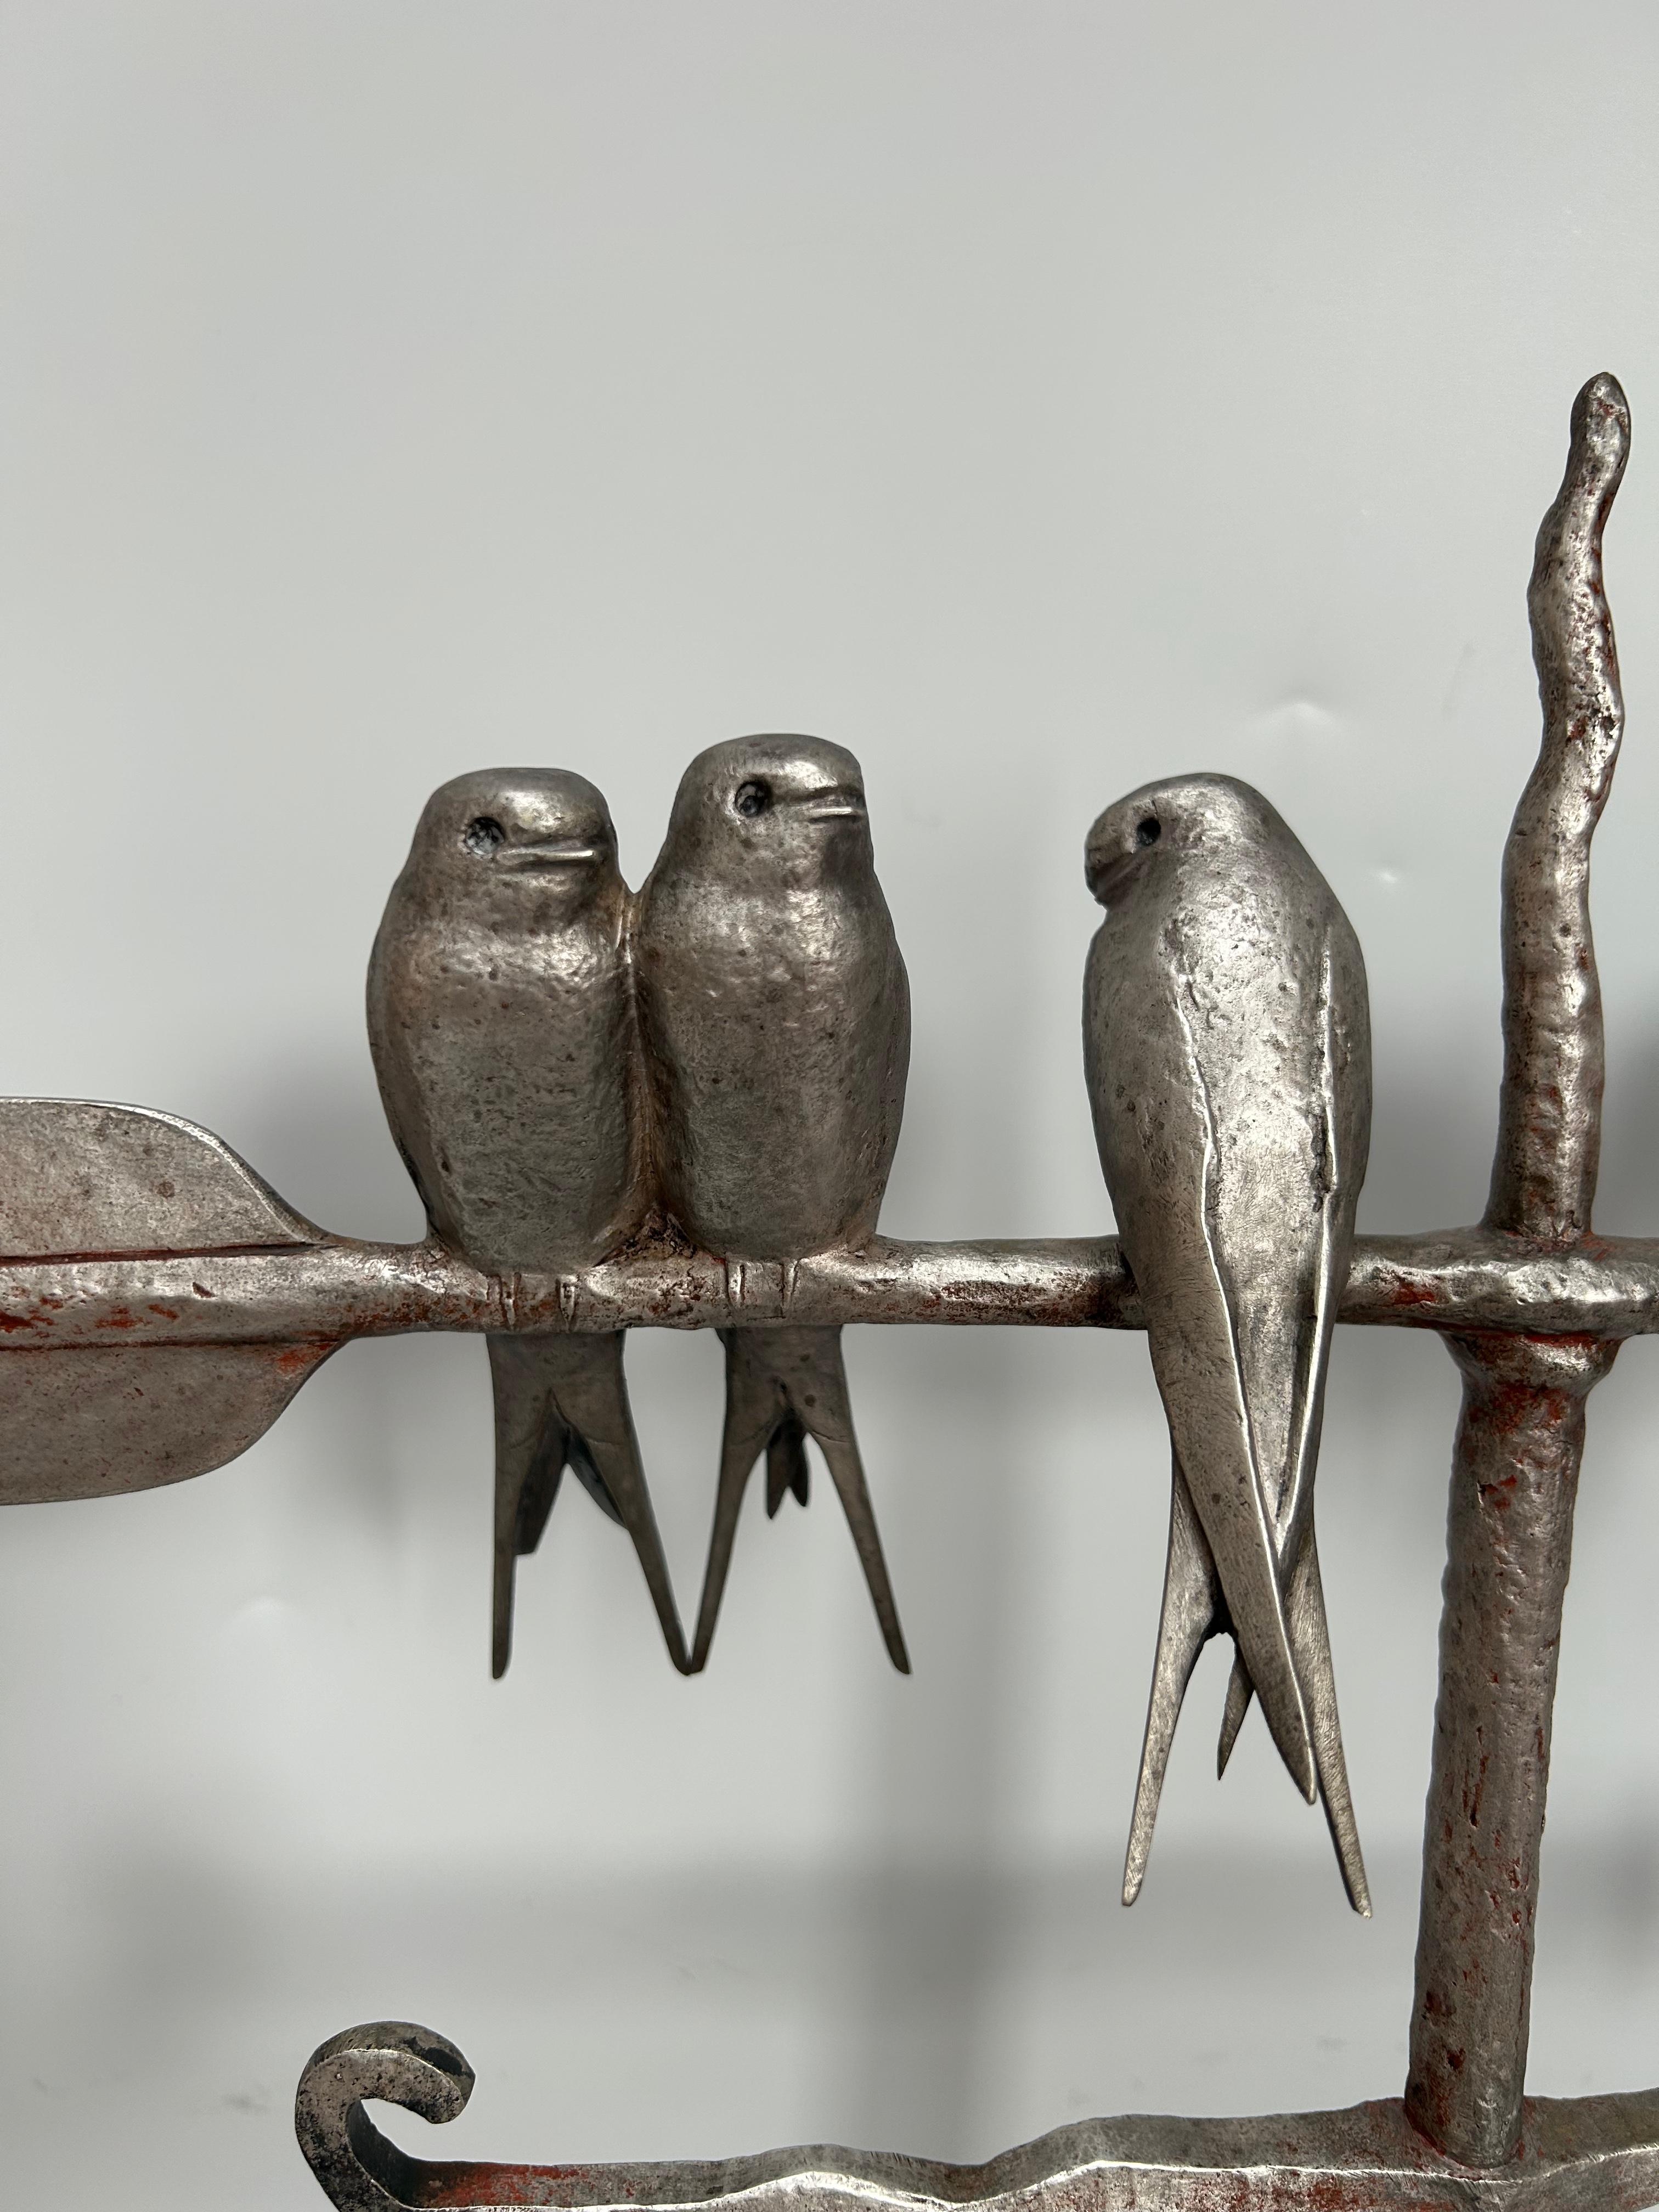 ANDRÉ-VINCENT BECQUEREL silvered bronze circa 1930.
7 swallows on a weather vane mounted on a surfine black marble base from Belgium.
Note 2 small chips on the marble .

Total height: 43 cm
Width: 58 cm
Base length: 32.3 cm
Base width: 10.2